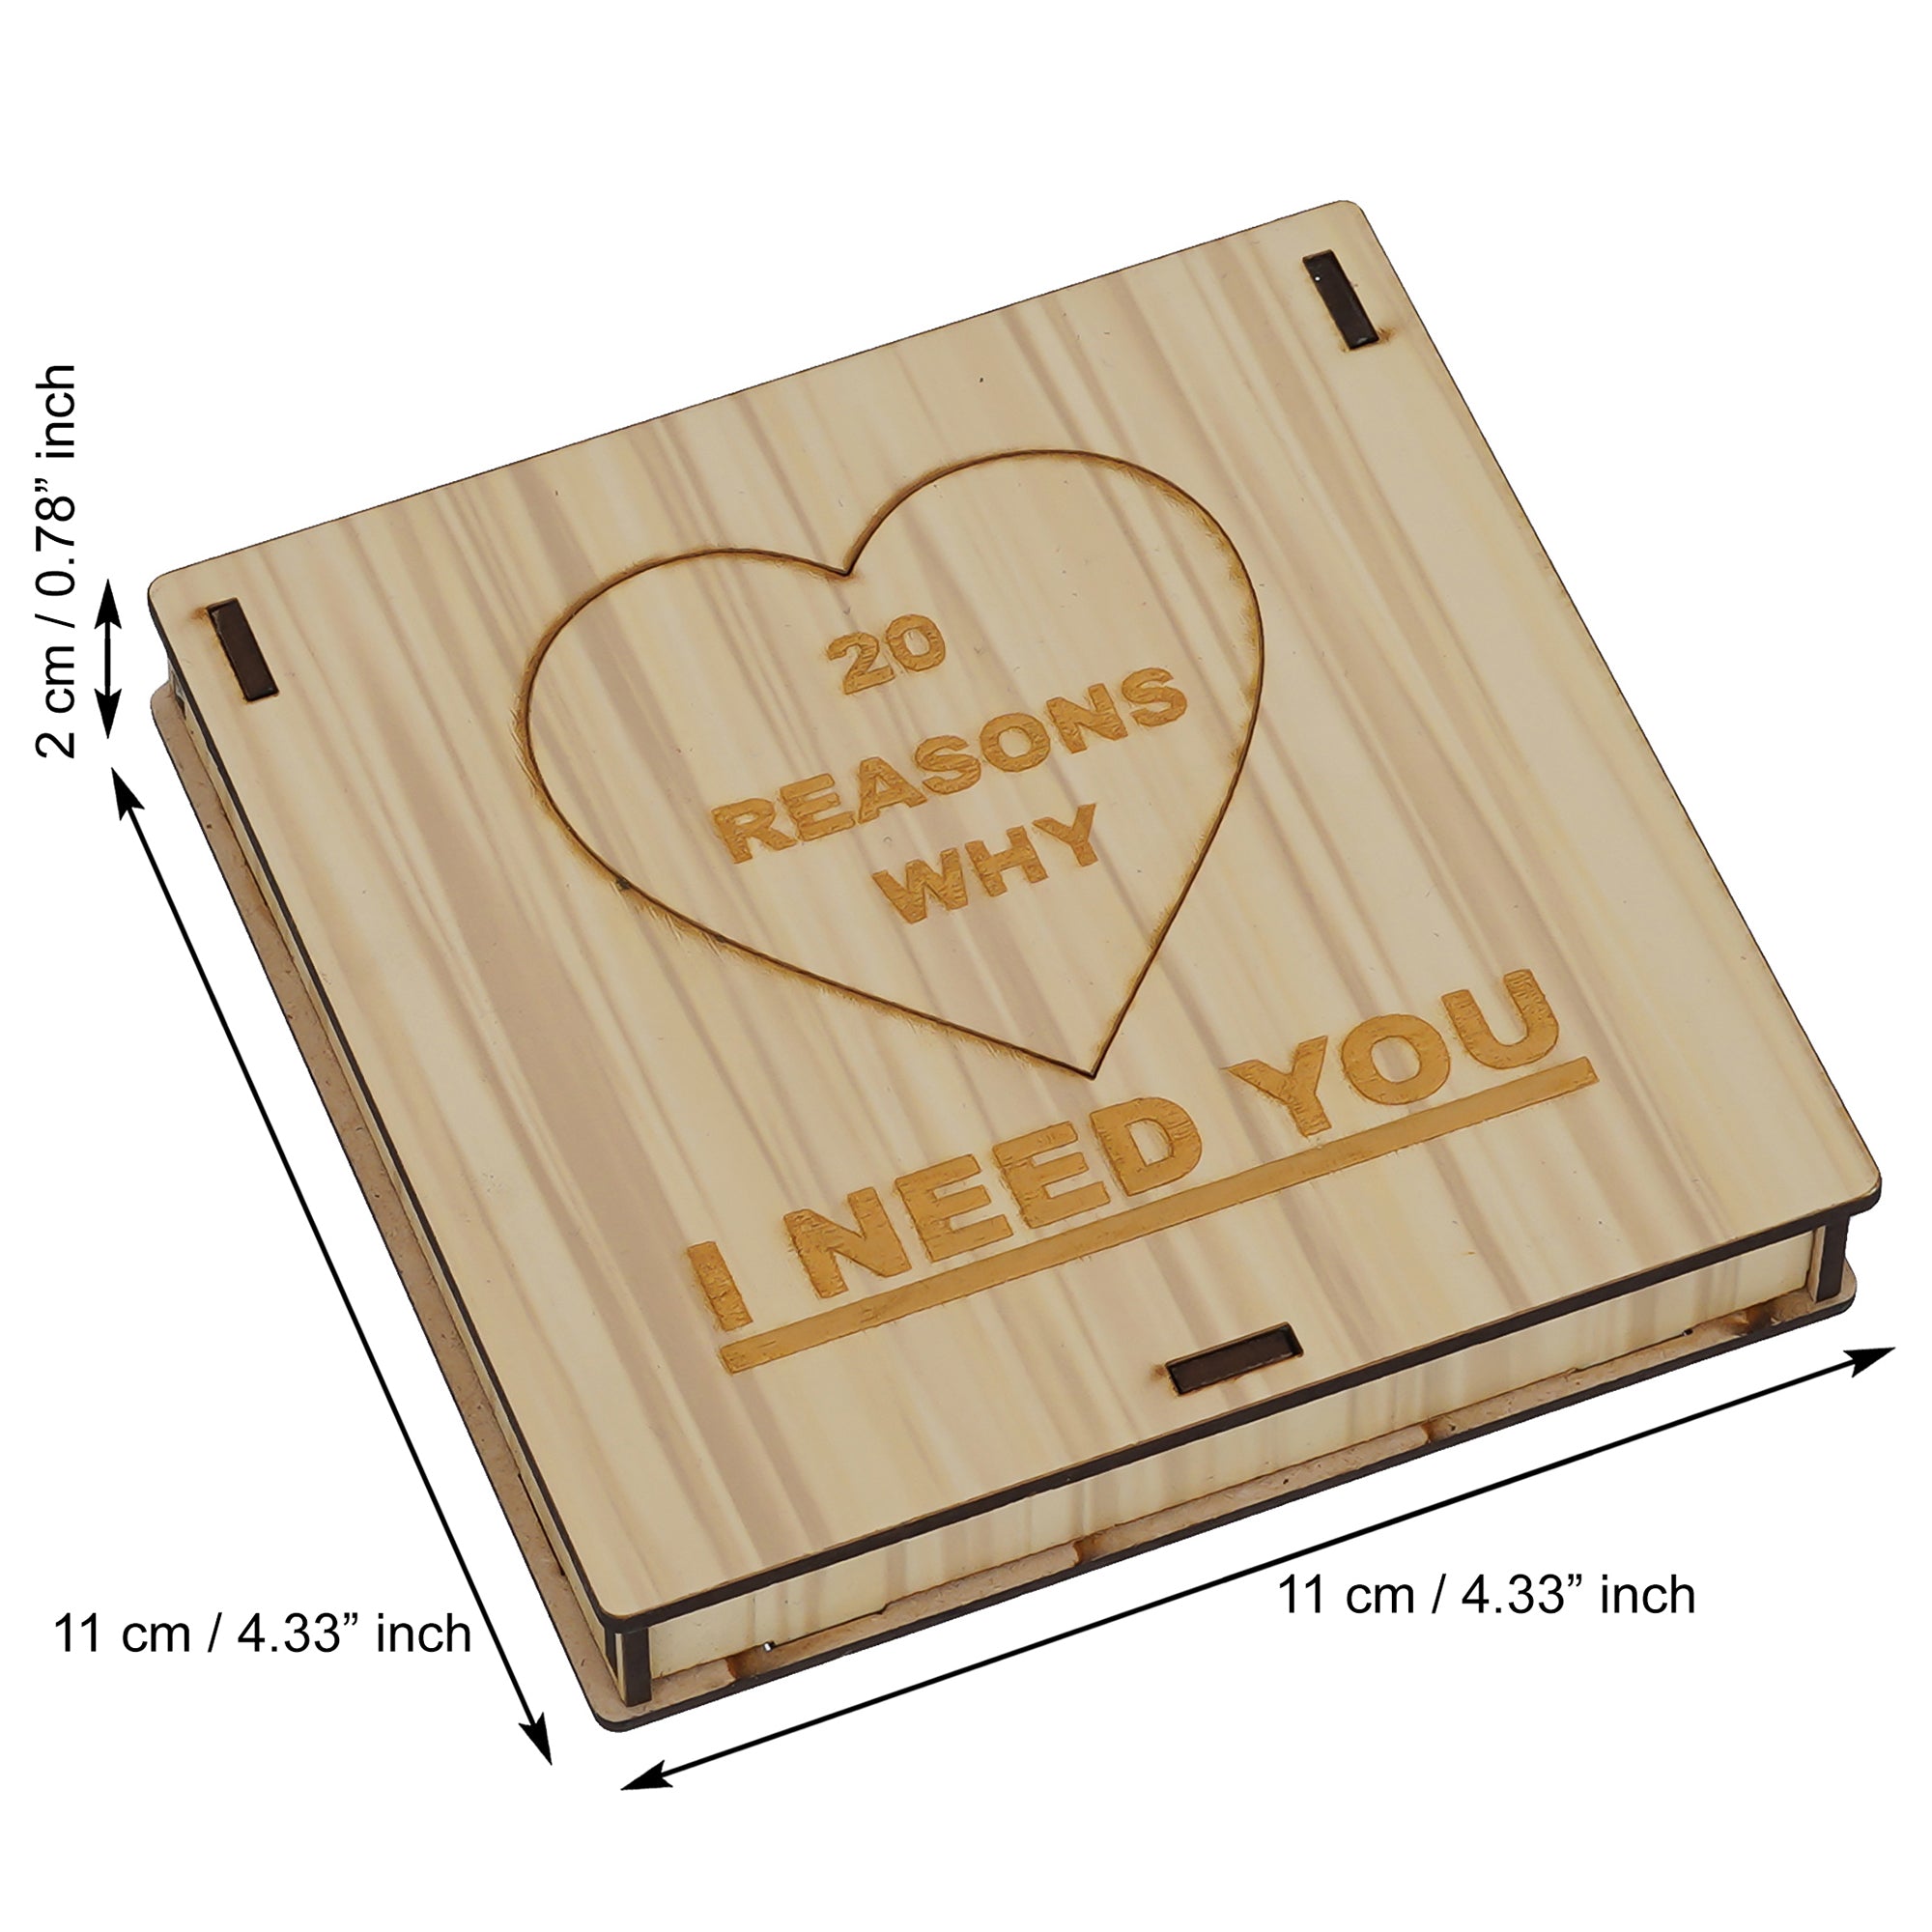 Valentine Combo of Pack of 12 Love Coupons Gift Cards Set, "20 Reasons Why I Need You" Printed on Little Hearts Wooden Gift Set 4